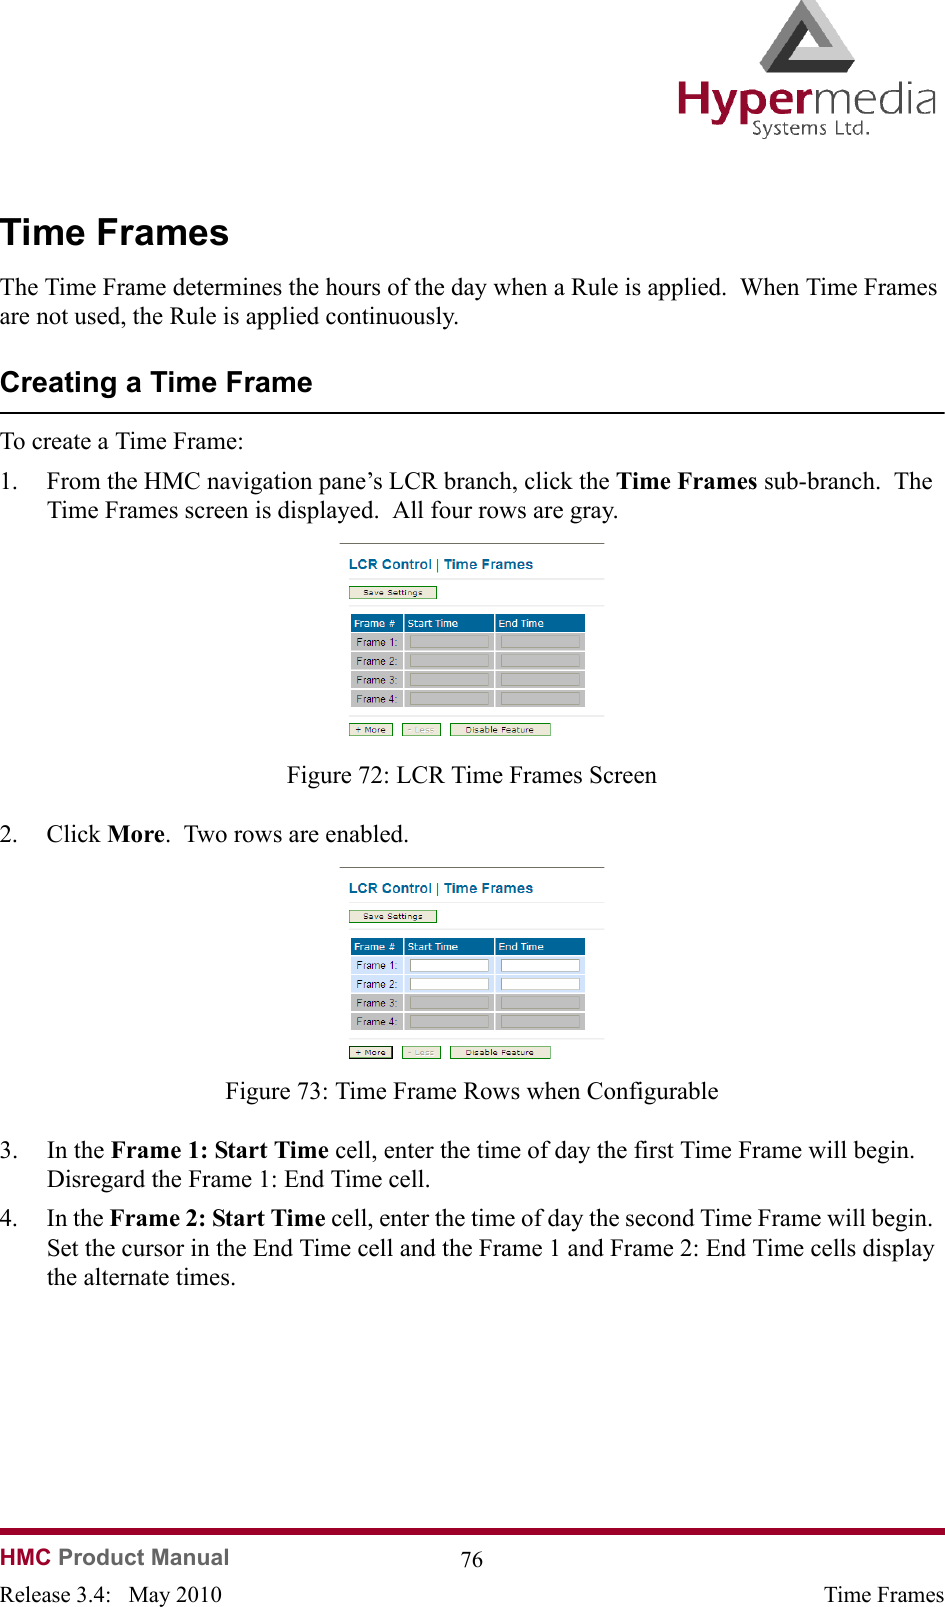   HMC Product Manual  76Release 3.4:   May 2010 Time FramesTime FramesThe Time Frame determines the hours of the day when a Rule is applied.  When Time Frames are not used, the Rule is applied continuously.Creating a Time FrameTo create a Time Frame:1. From the HMC navigation pane’s LCR branch, click the Time Frames sub-branch.  The Time Frames screen is displayed.  All four rows are gray.              Figure 72: LCR Time Frames Screen2. Click More.  Two rows are enabled.              Figure 73: Time Frame Rows when Configurable3. In the Frame 1: Start Time cell, enter the time of day the first Time Frame will begin.  Disregard the Frame 1: End Time cell.4. In the Frame 2: Start Time cell, enter the time of day the second Time Frame will begin.  Set the cursor in the End Time cell and the Frame 1 and Frame 2: End Time cells display the alternate times.